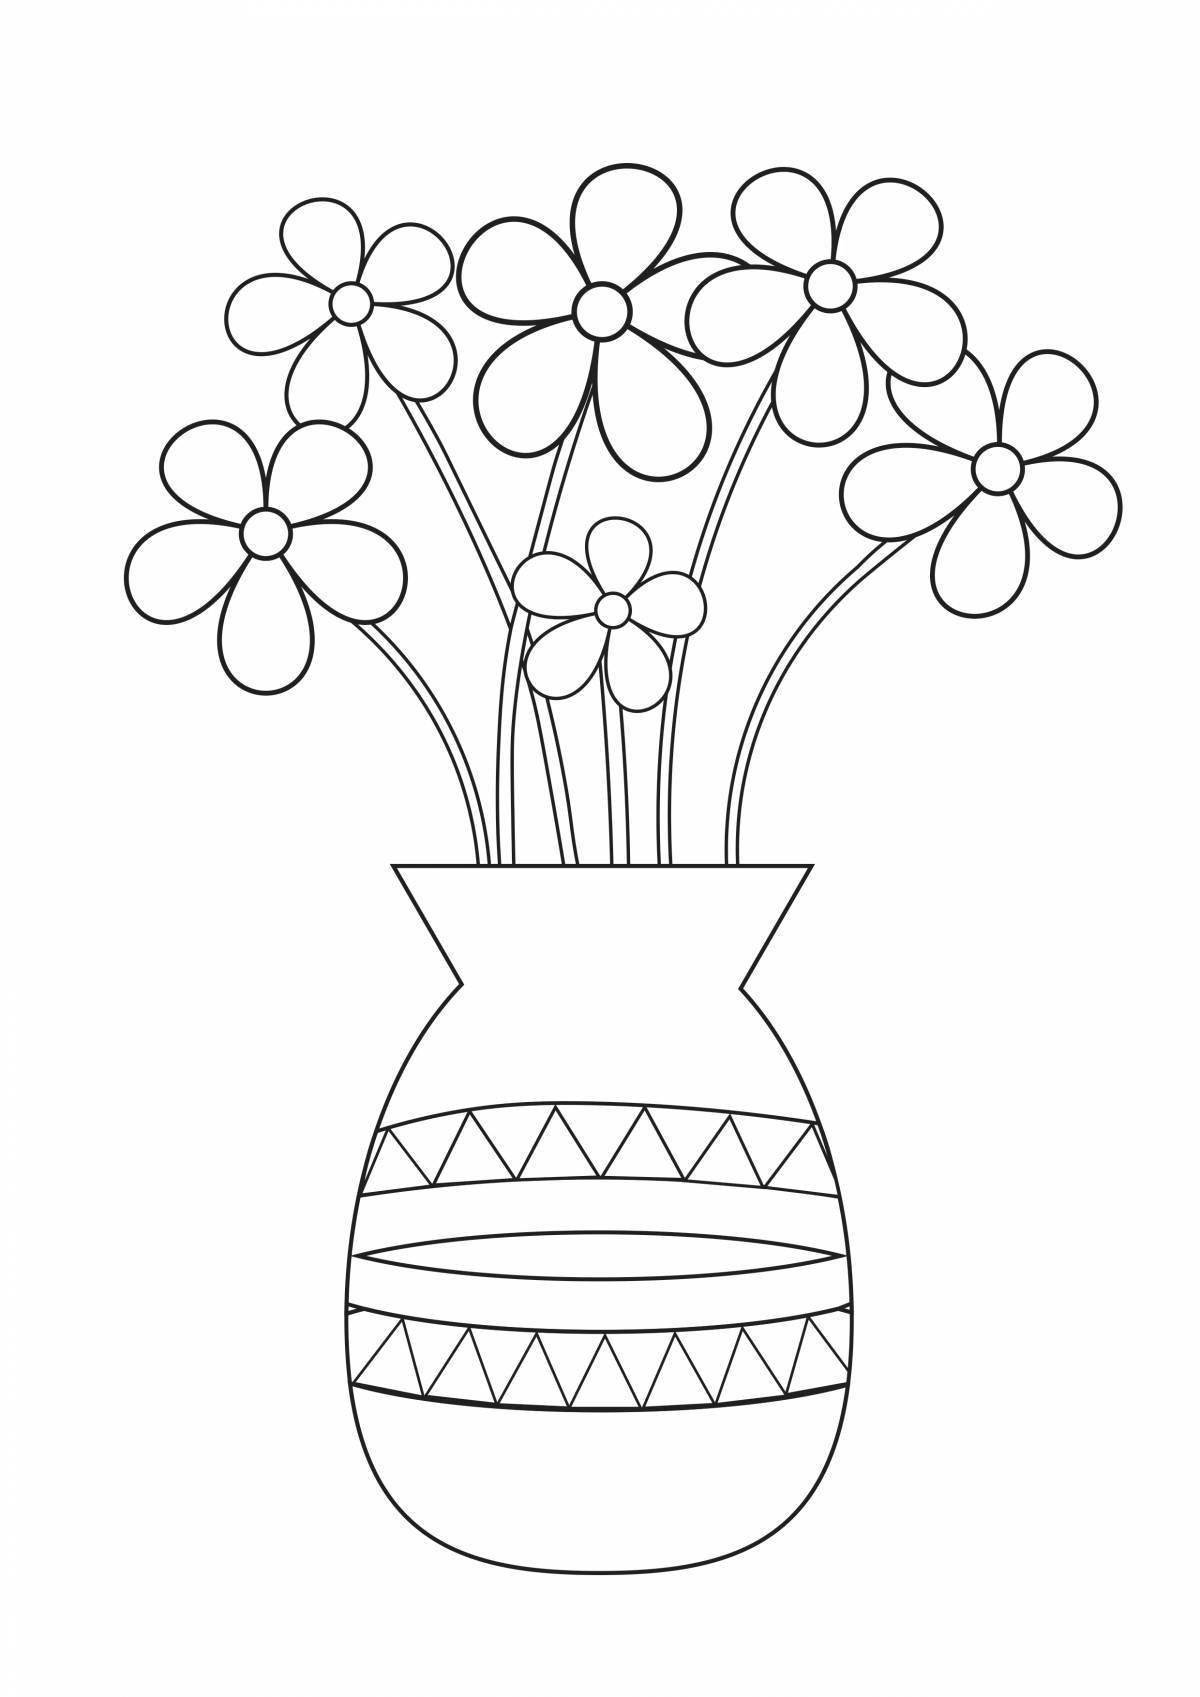 Bright vase with flowers coloring book for children 5-6 years old